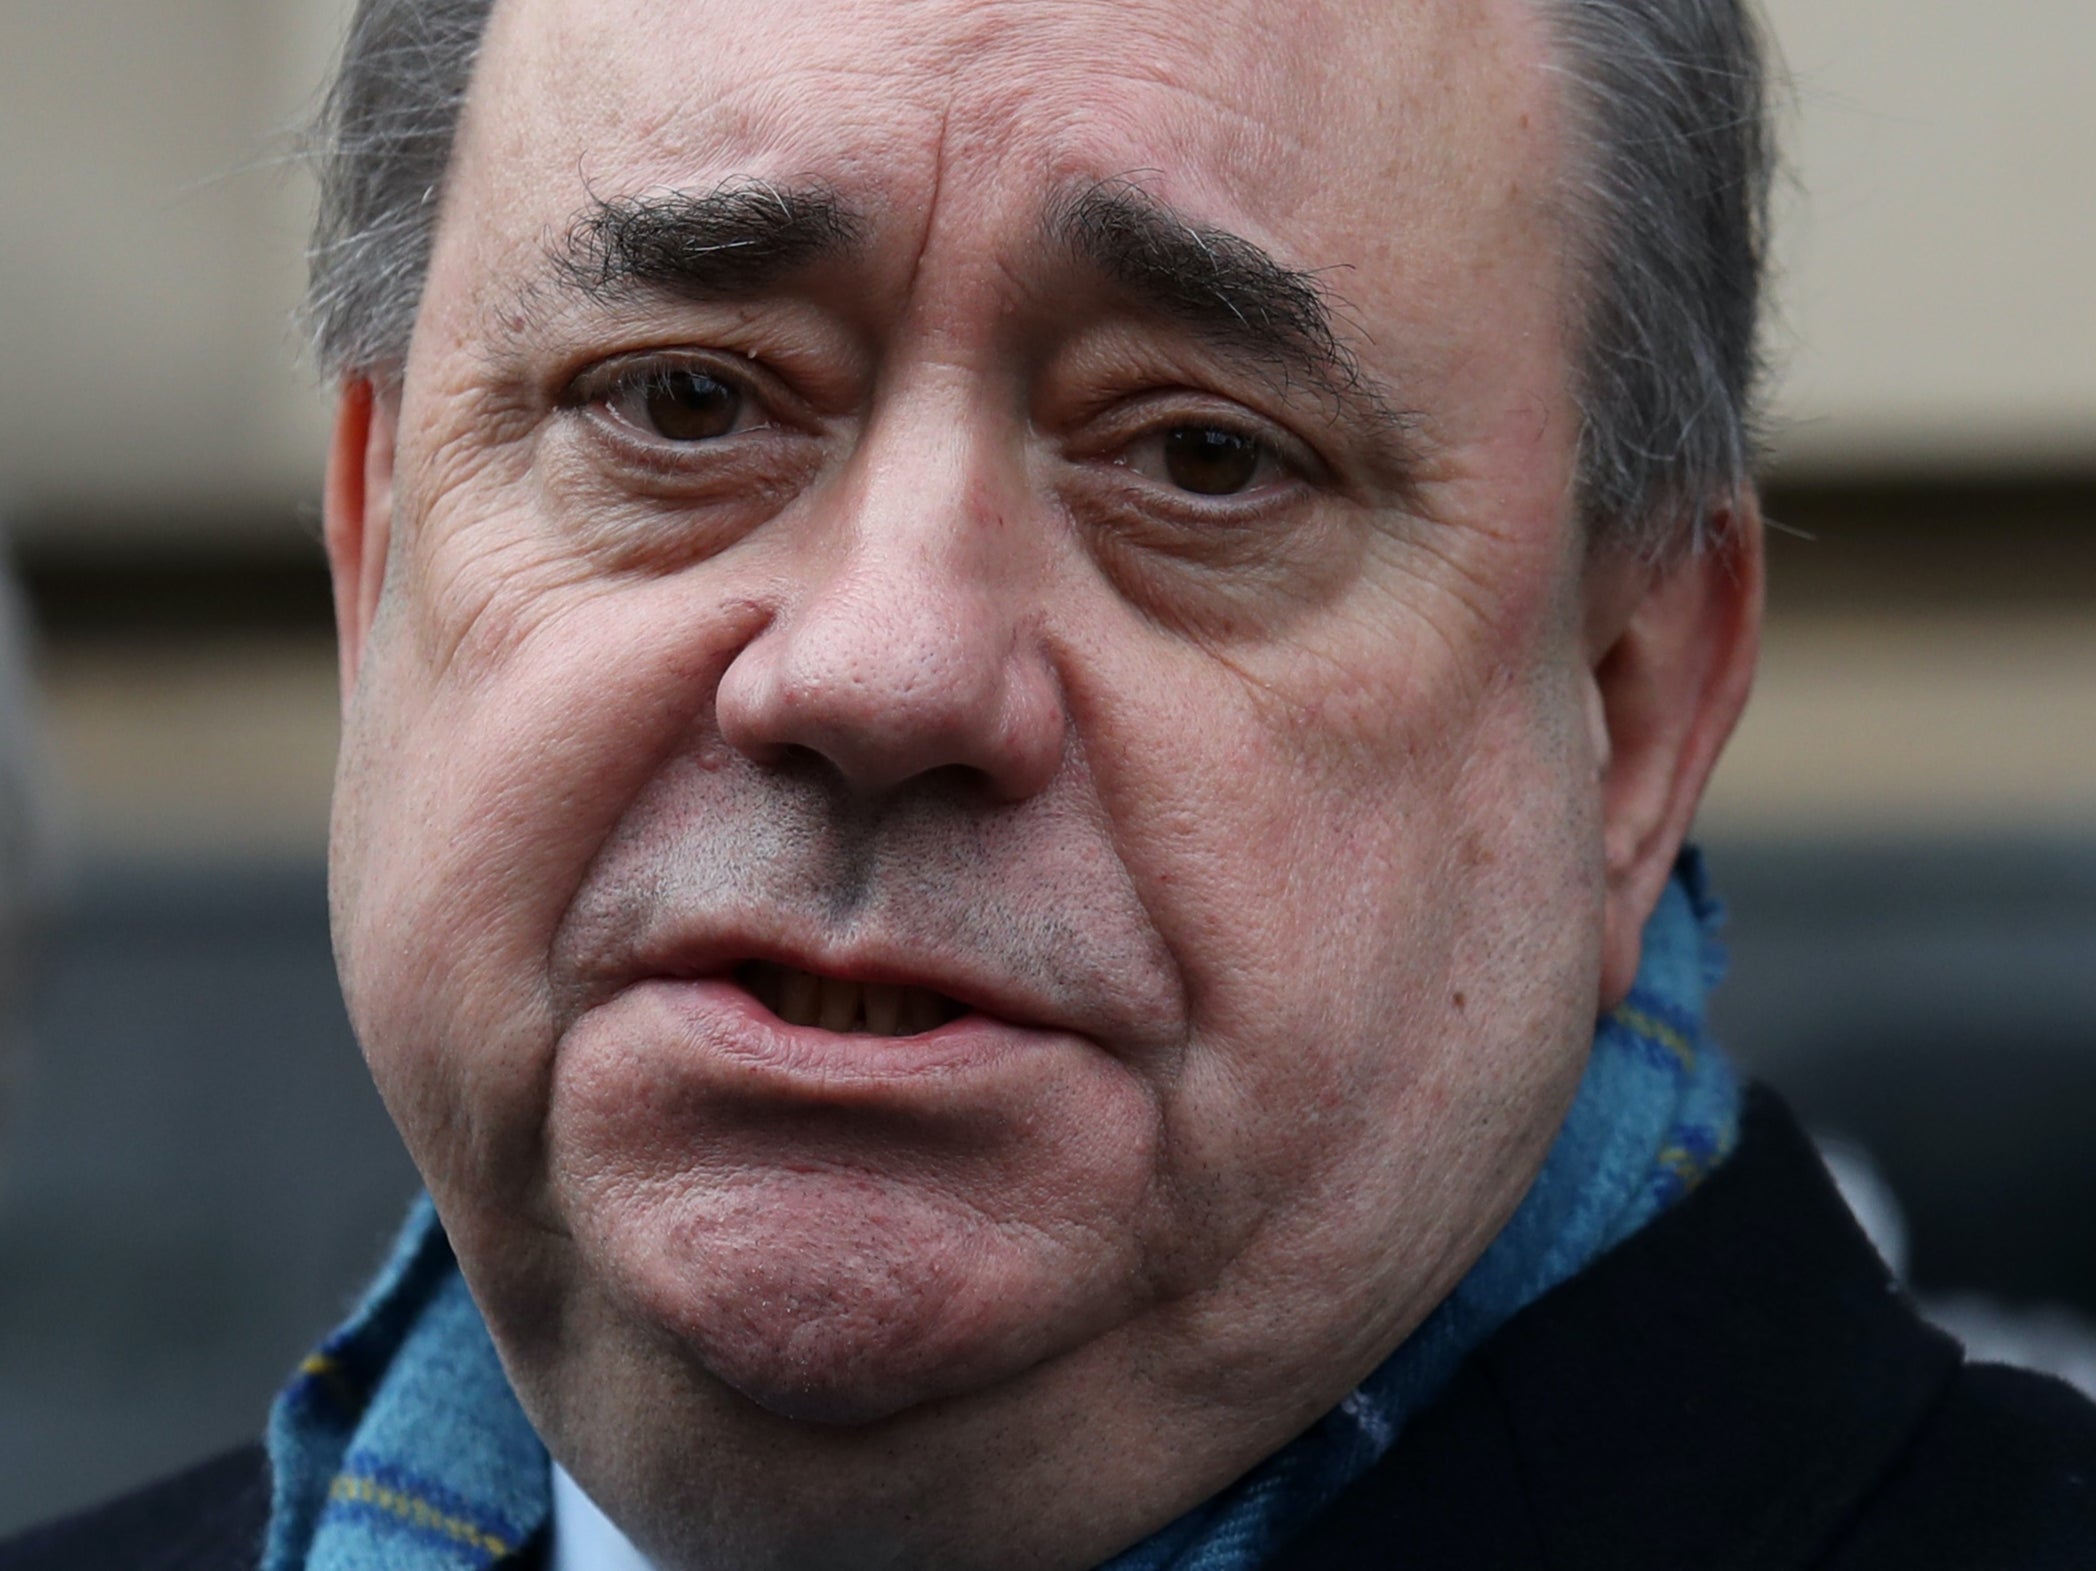 Alex Salmond quit the SNP and has since started the pro-independence Alba party